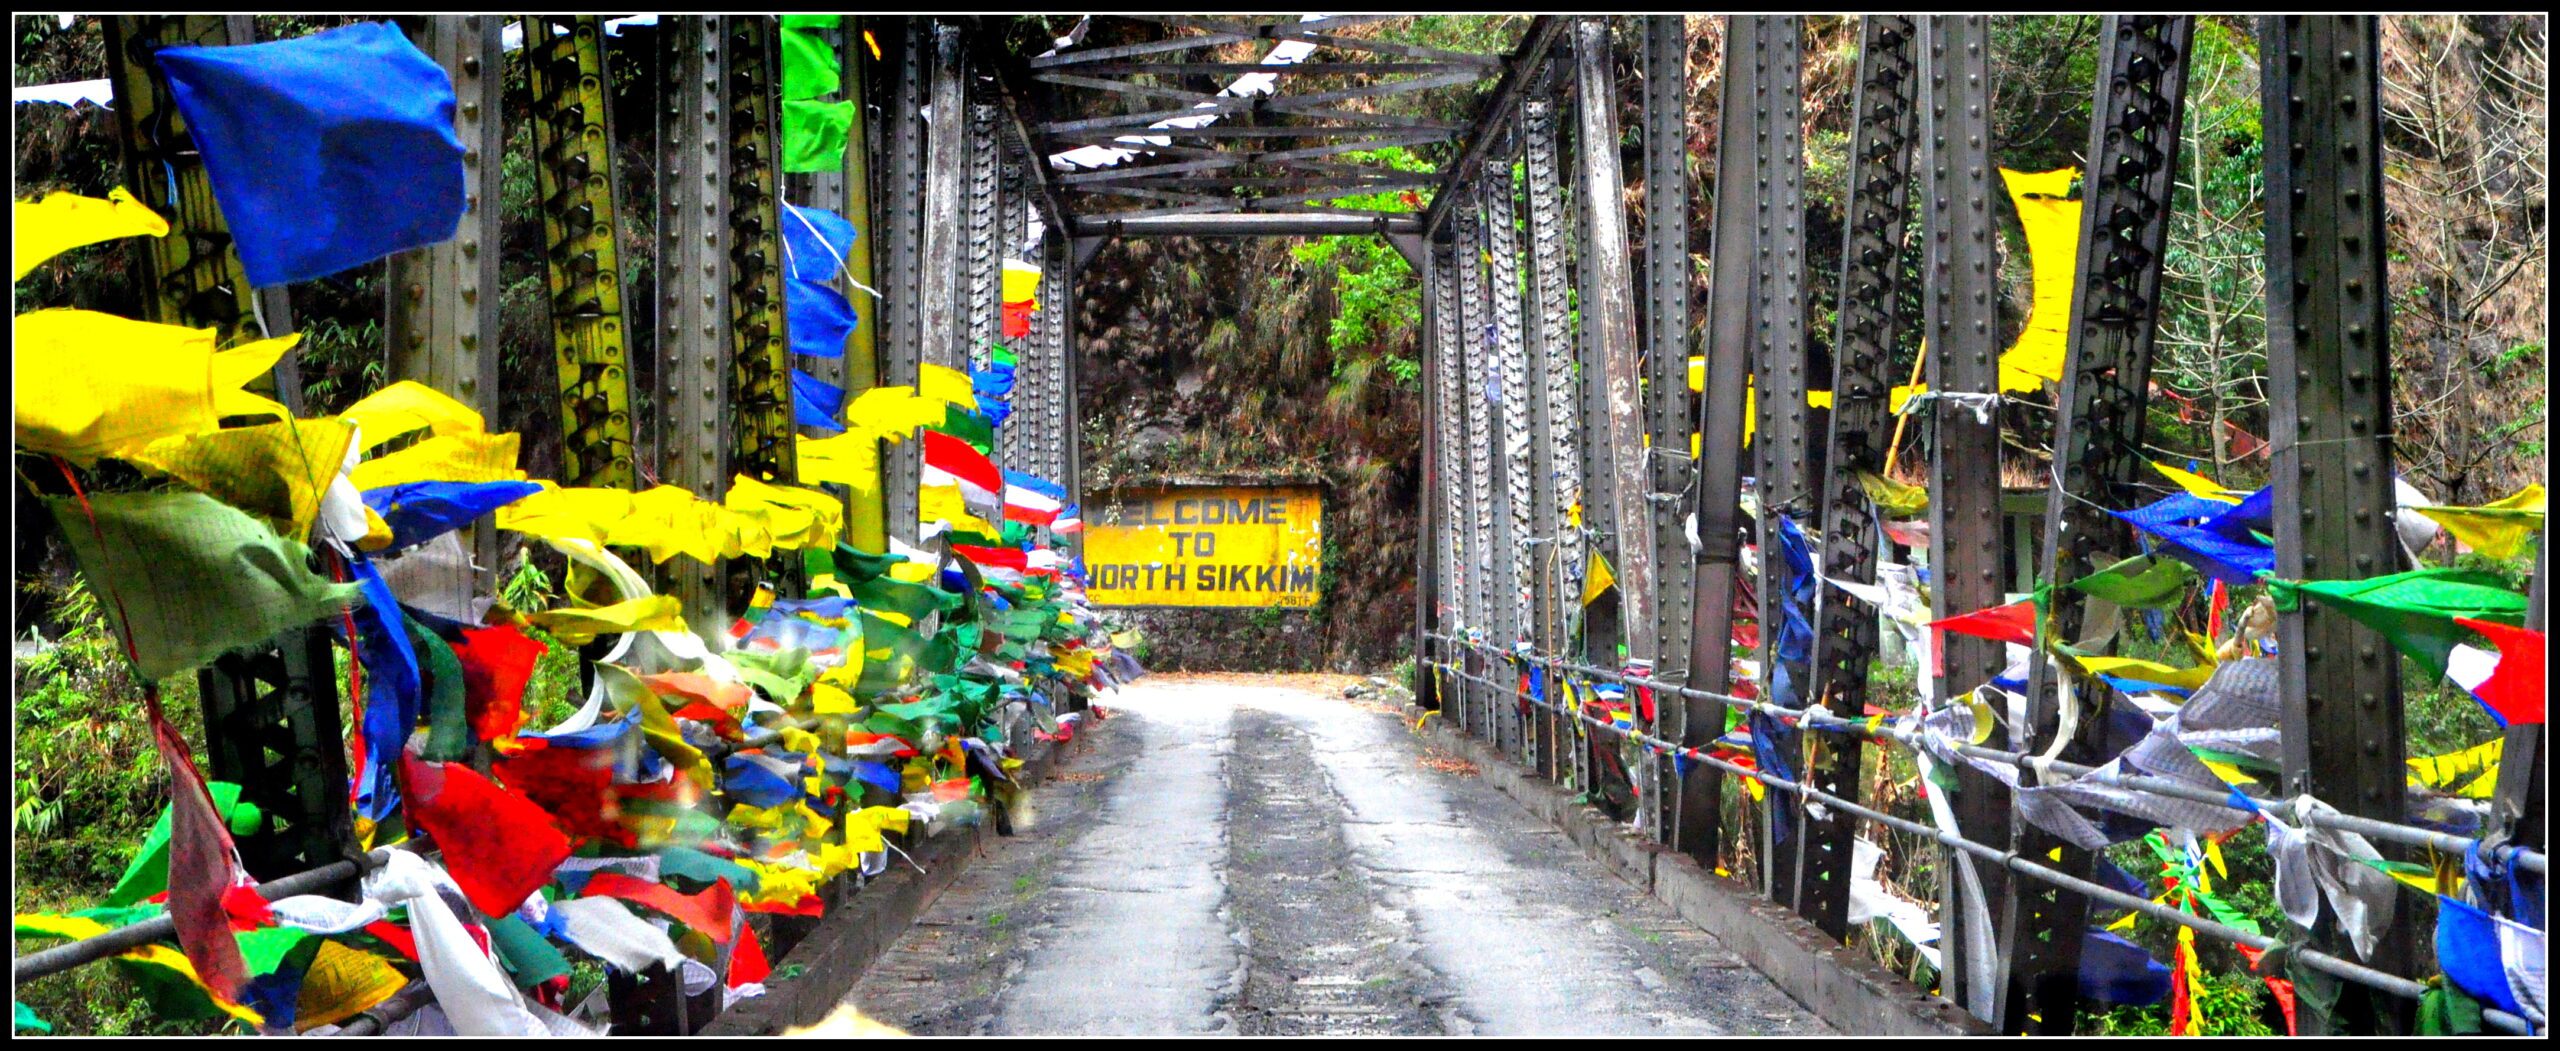 Welcome to North Sikkim